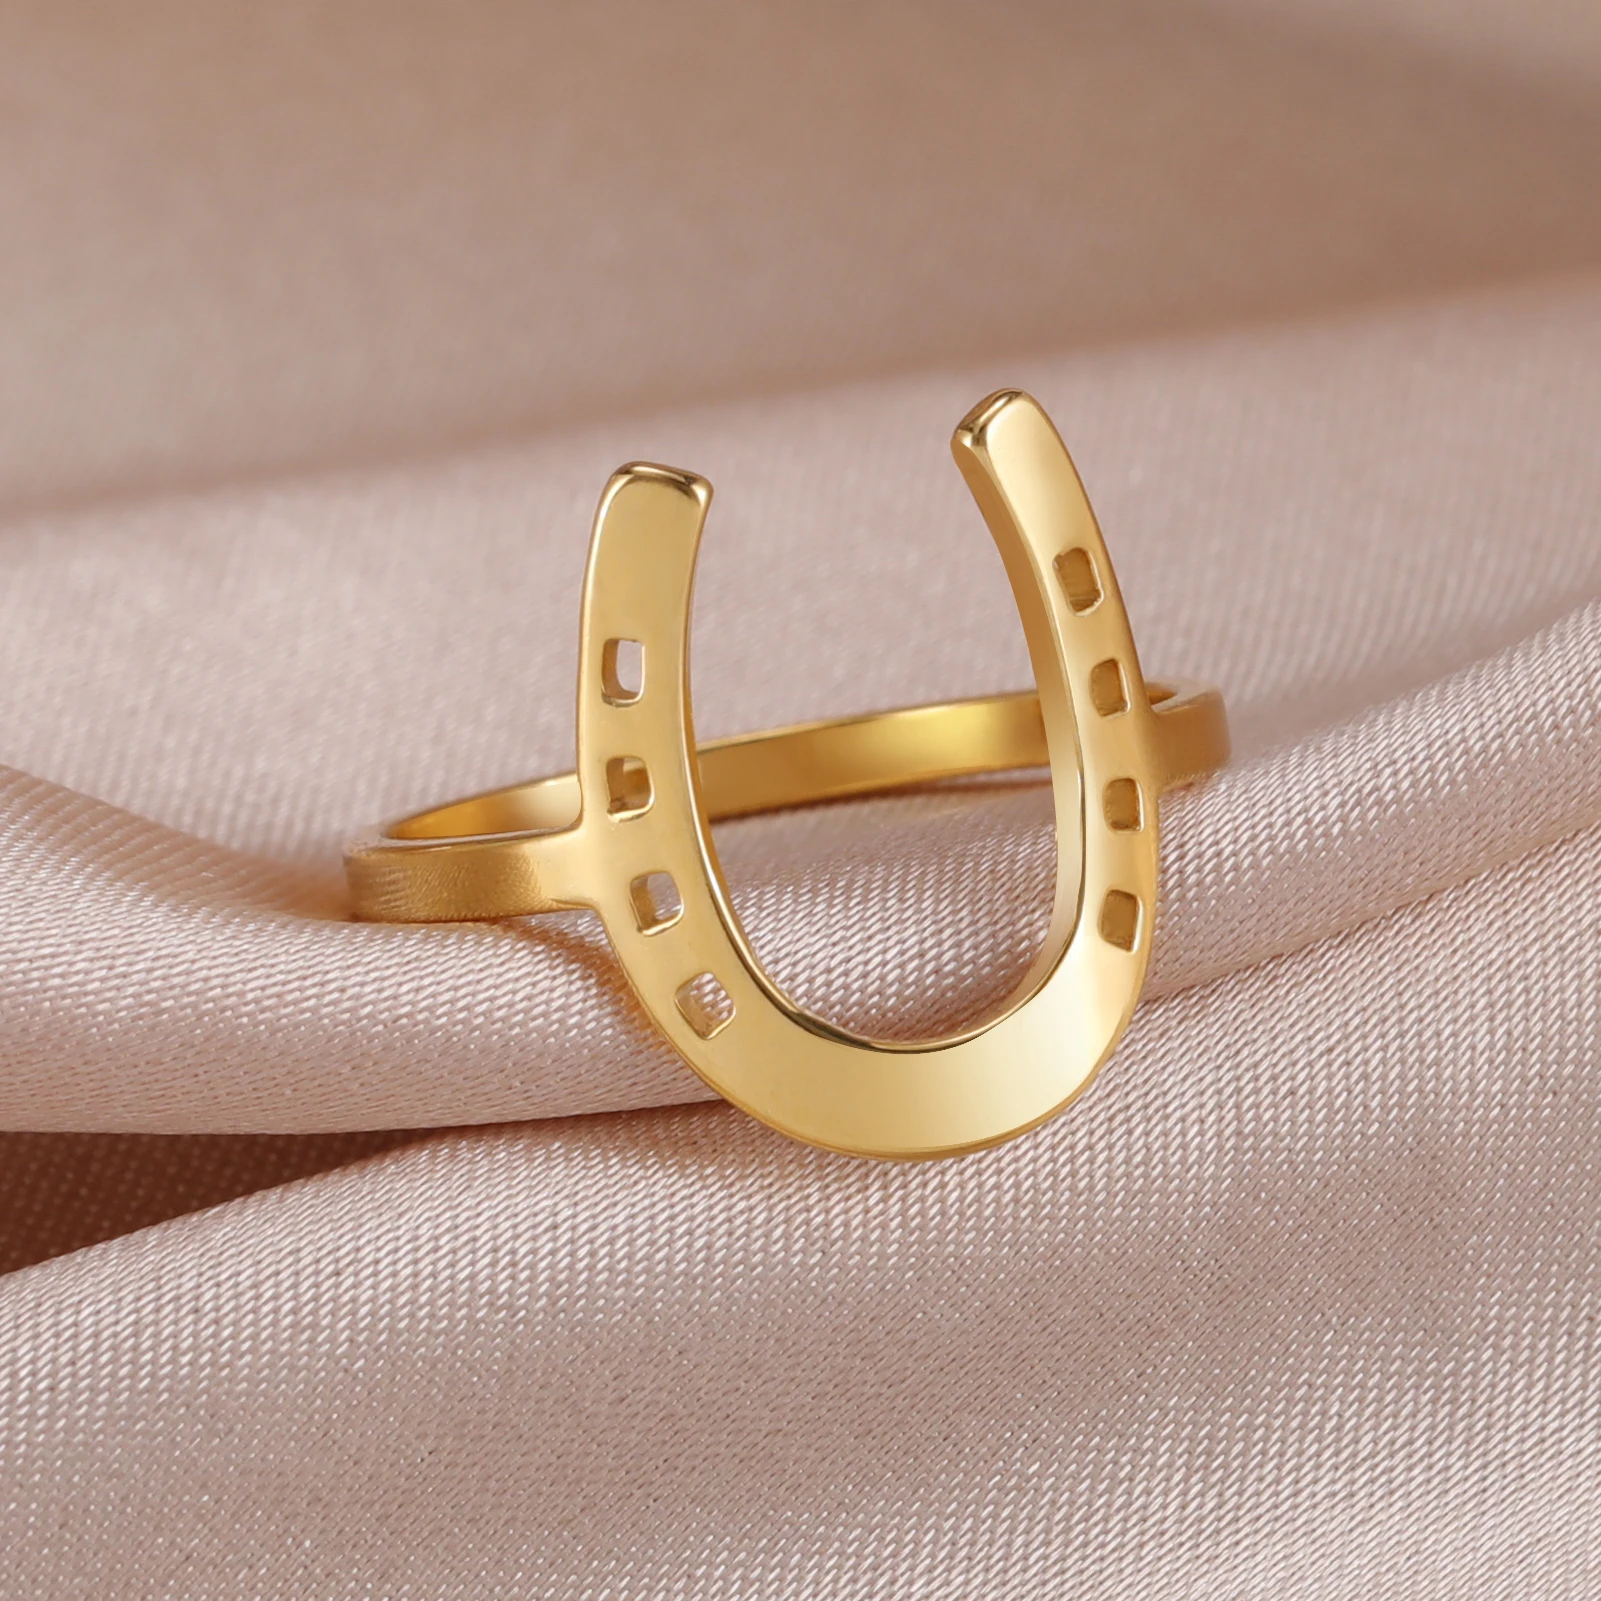 Skyrim U-Shaped Horseshoe Women Ring Stainless Steel Gold Color Finger Rings Fashion Lucky Jewelry Birthday Gift for Friends